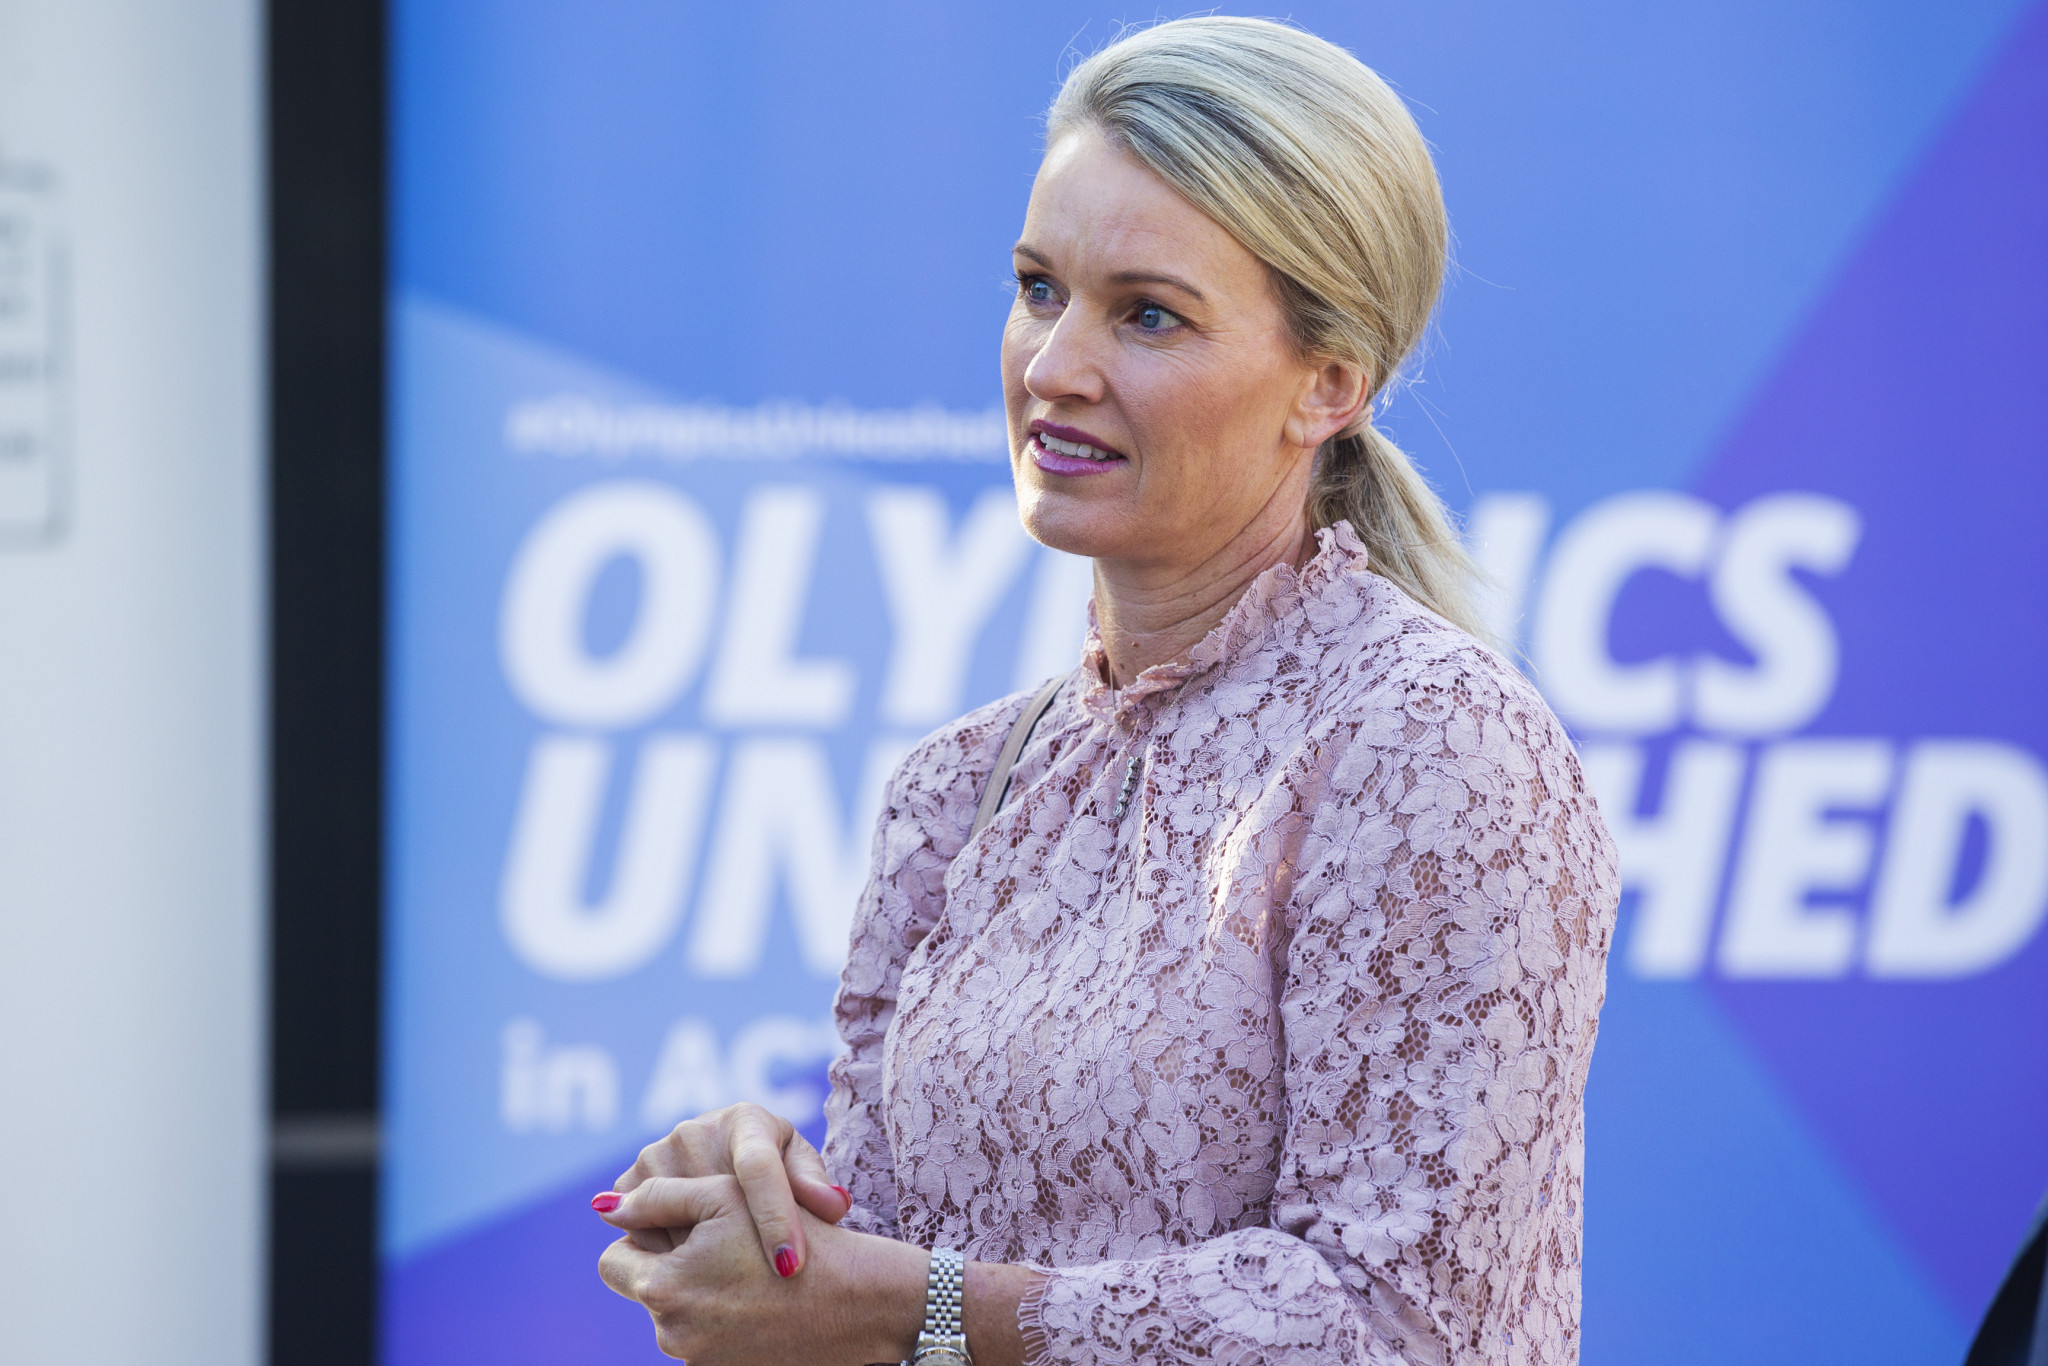 Dobson and Culbert named co-chairs of new-look Australian Olympians Association